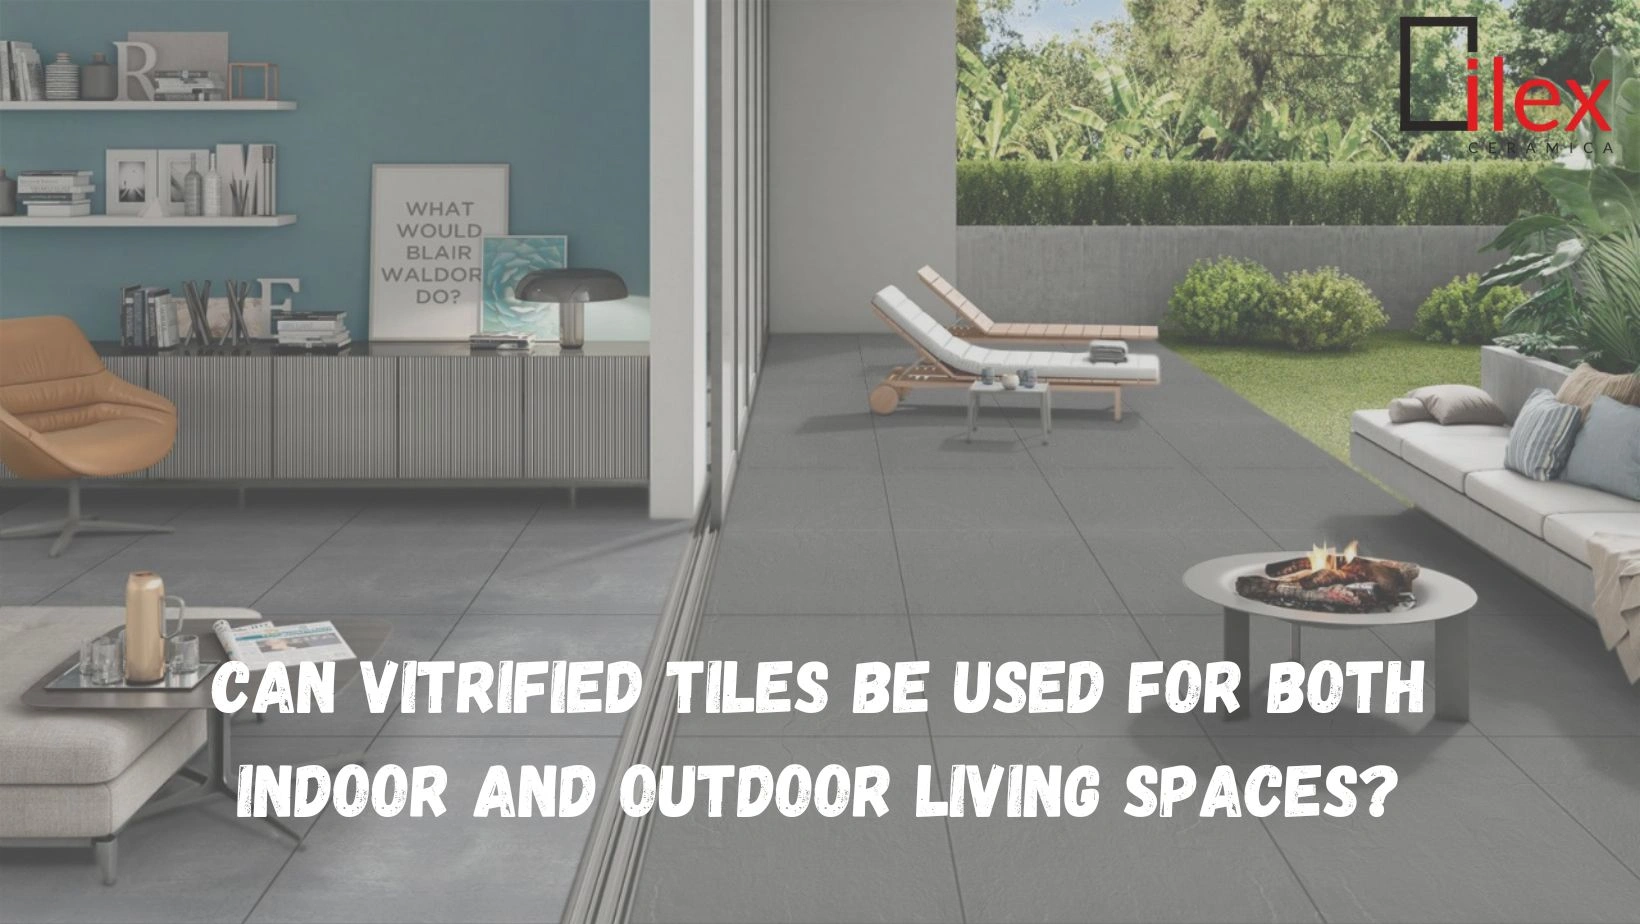 Can Vitrified Tiles be Used for Both Indoor and Outdoor Living Spaces?